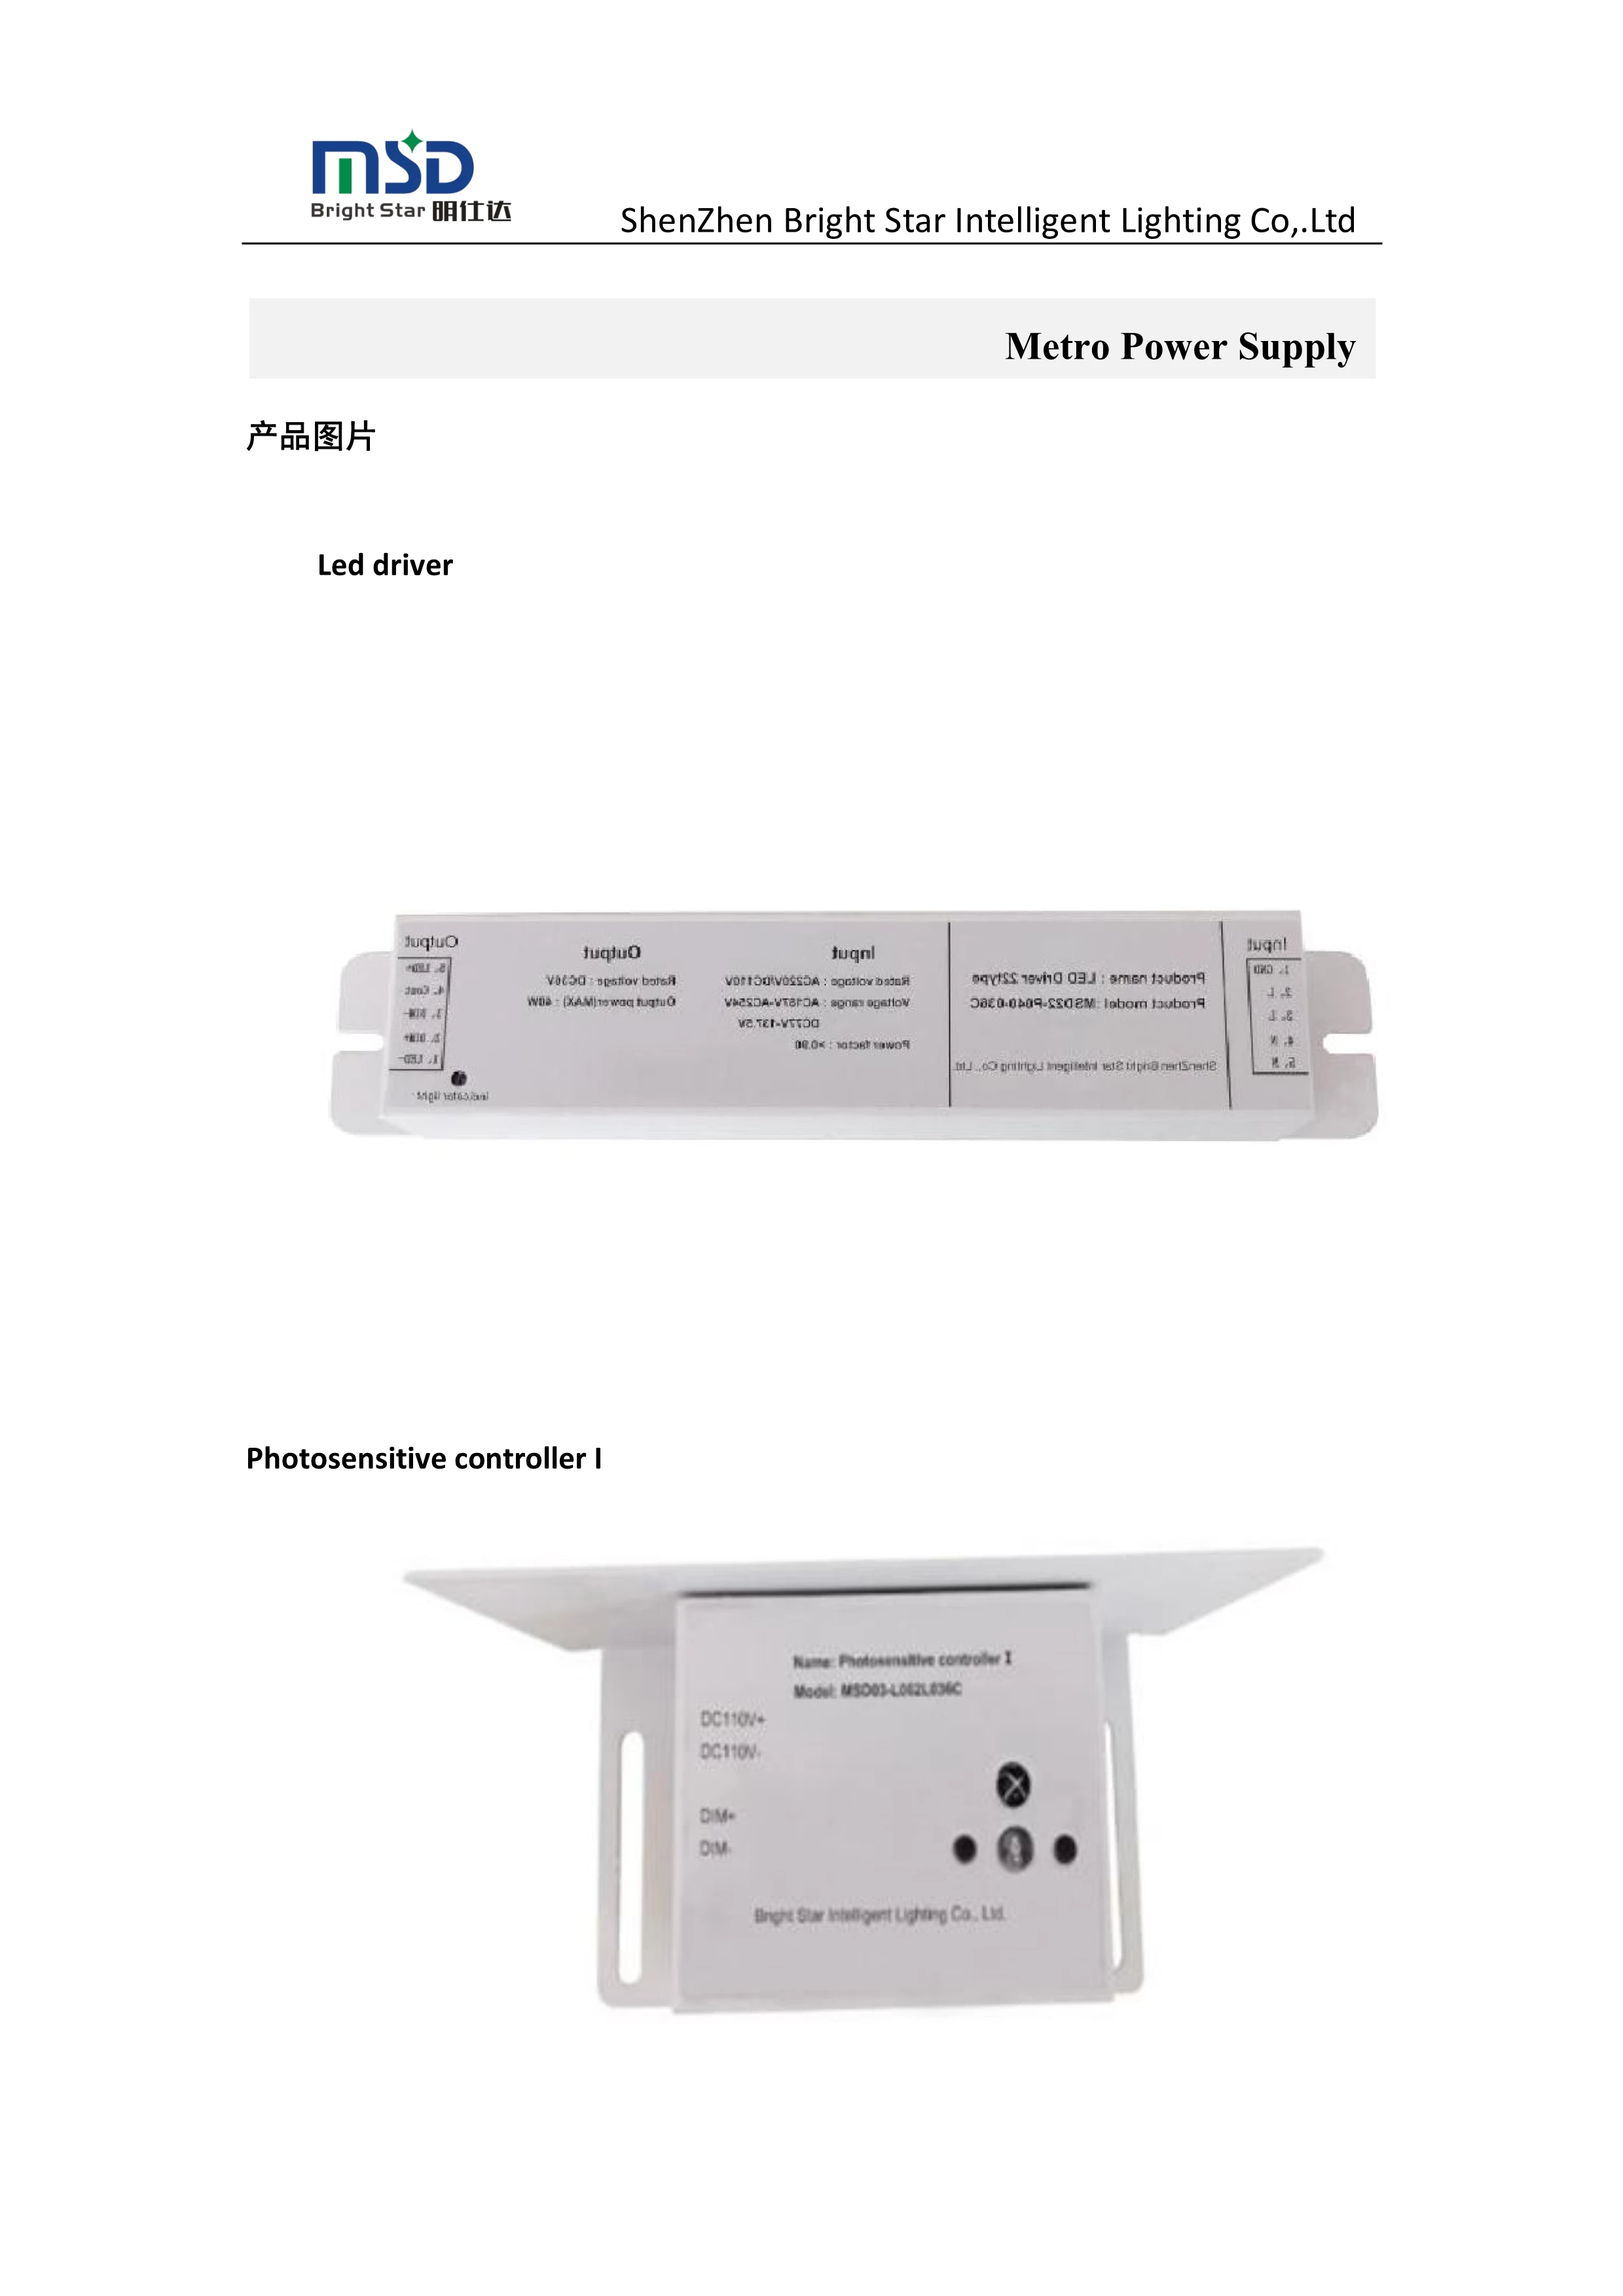 china supplier Metro Power Supply 40W led driver for metro station/train More parameters can be customized